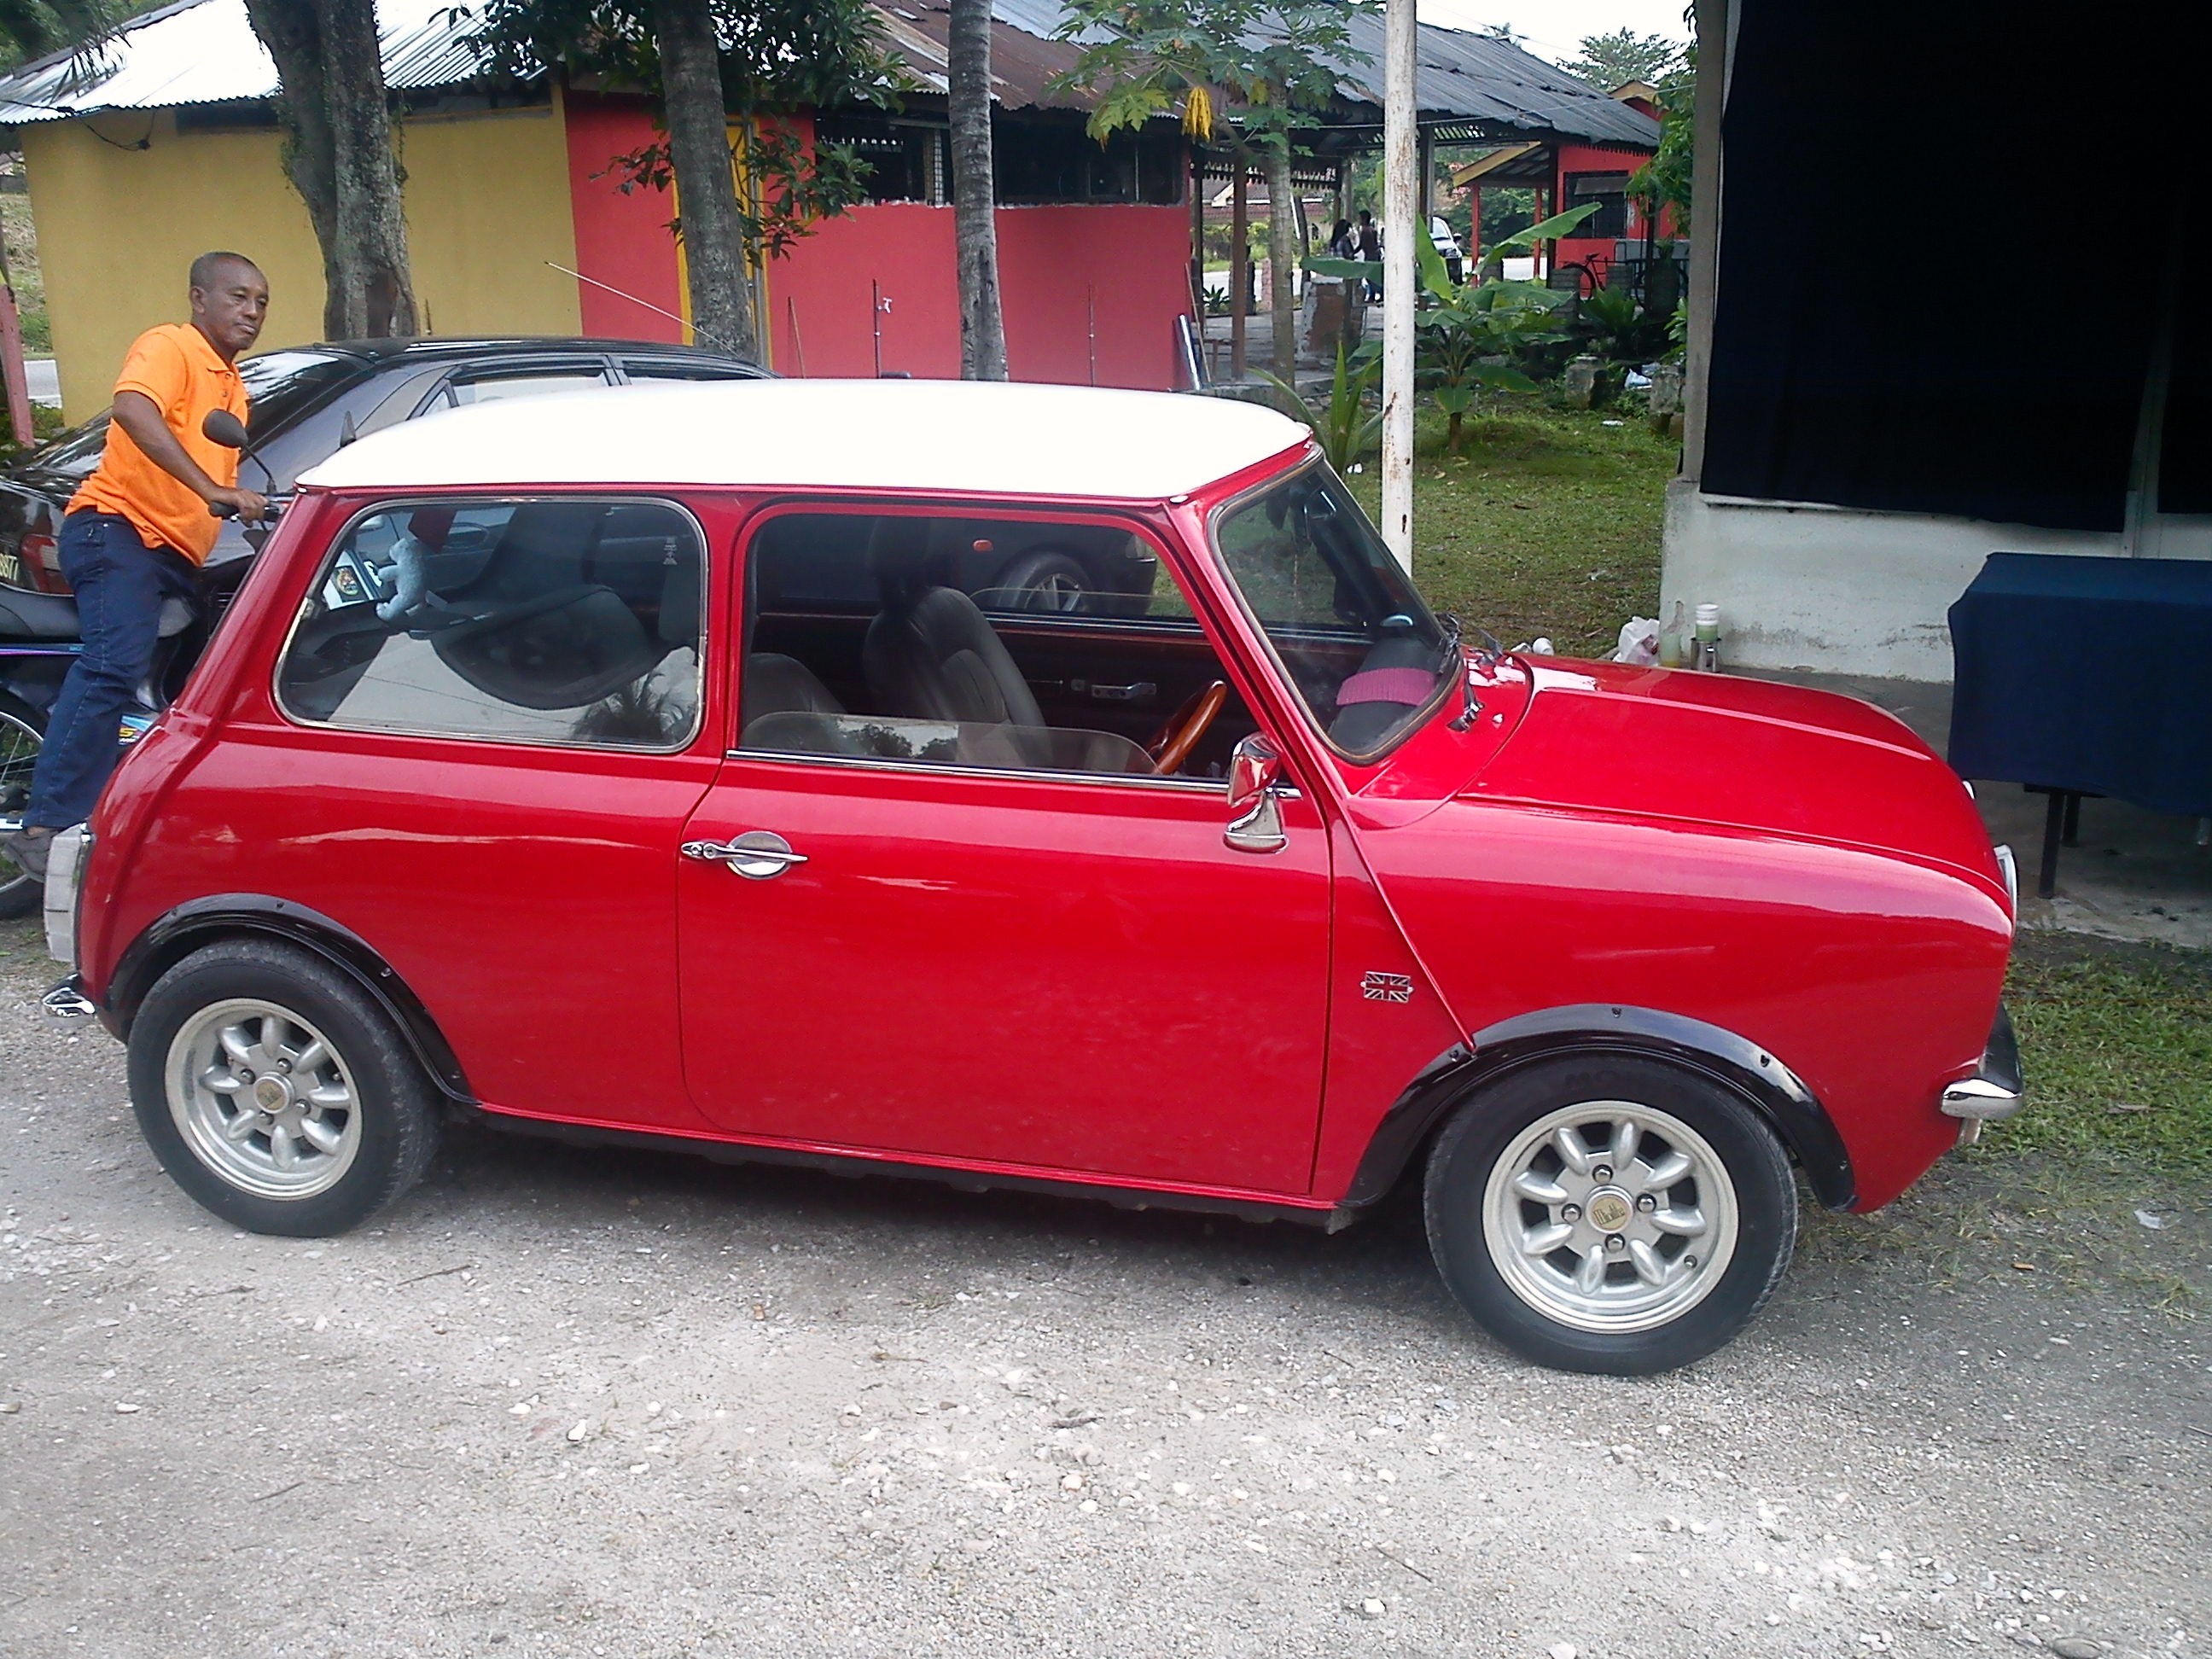 mini clubman related images,301 to 350 - Zuoda Images